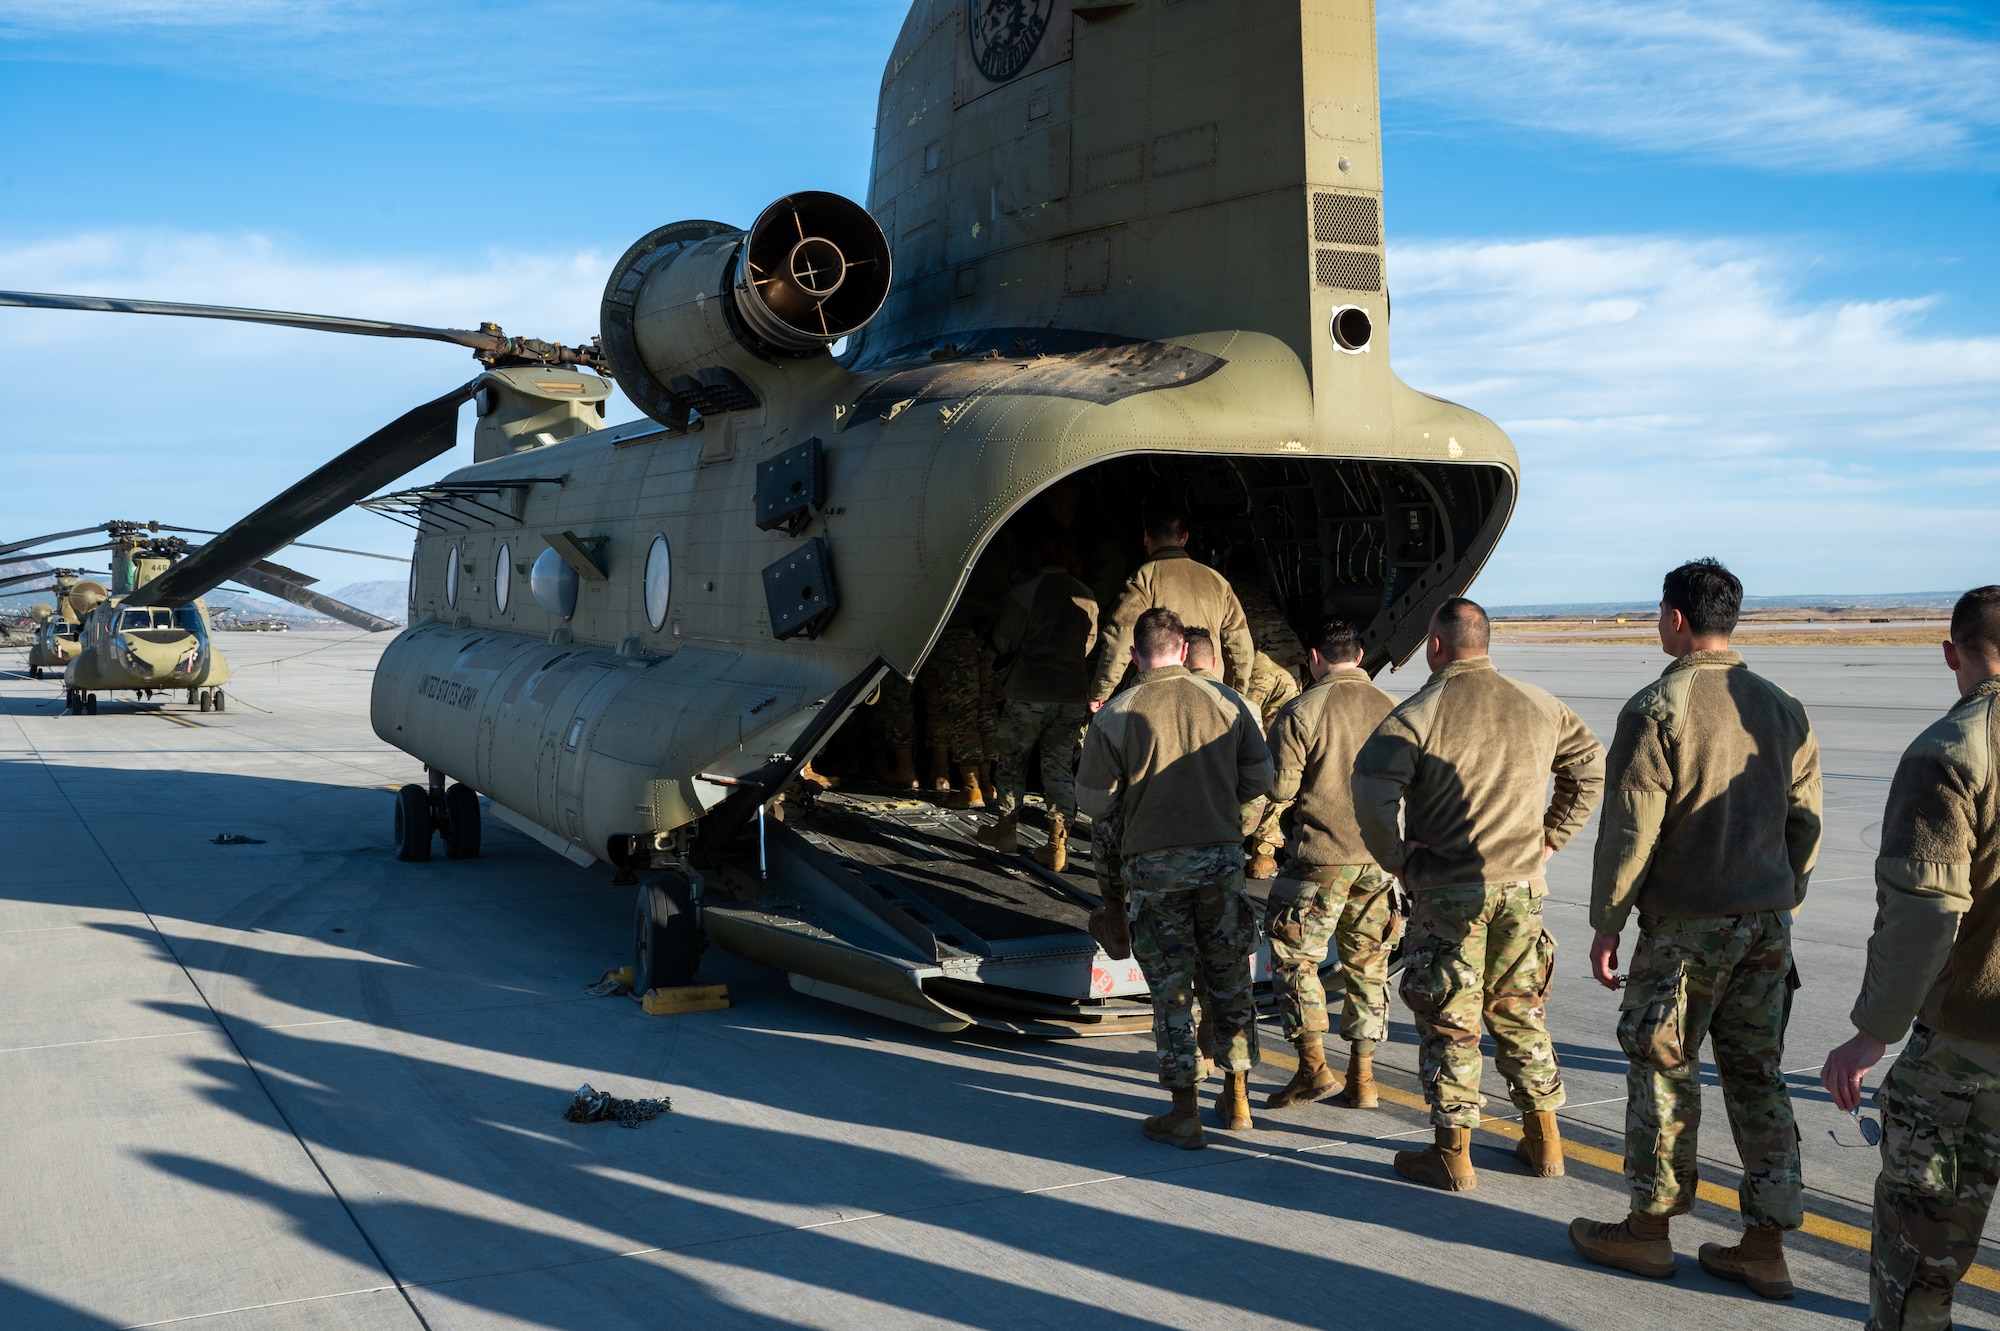 Guardians load onto a U.S. Army CH-47 Chinook for a partnership effort reenlistment flight.